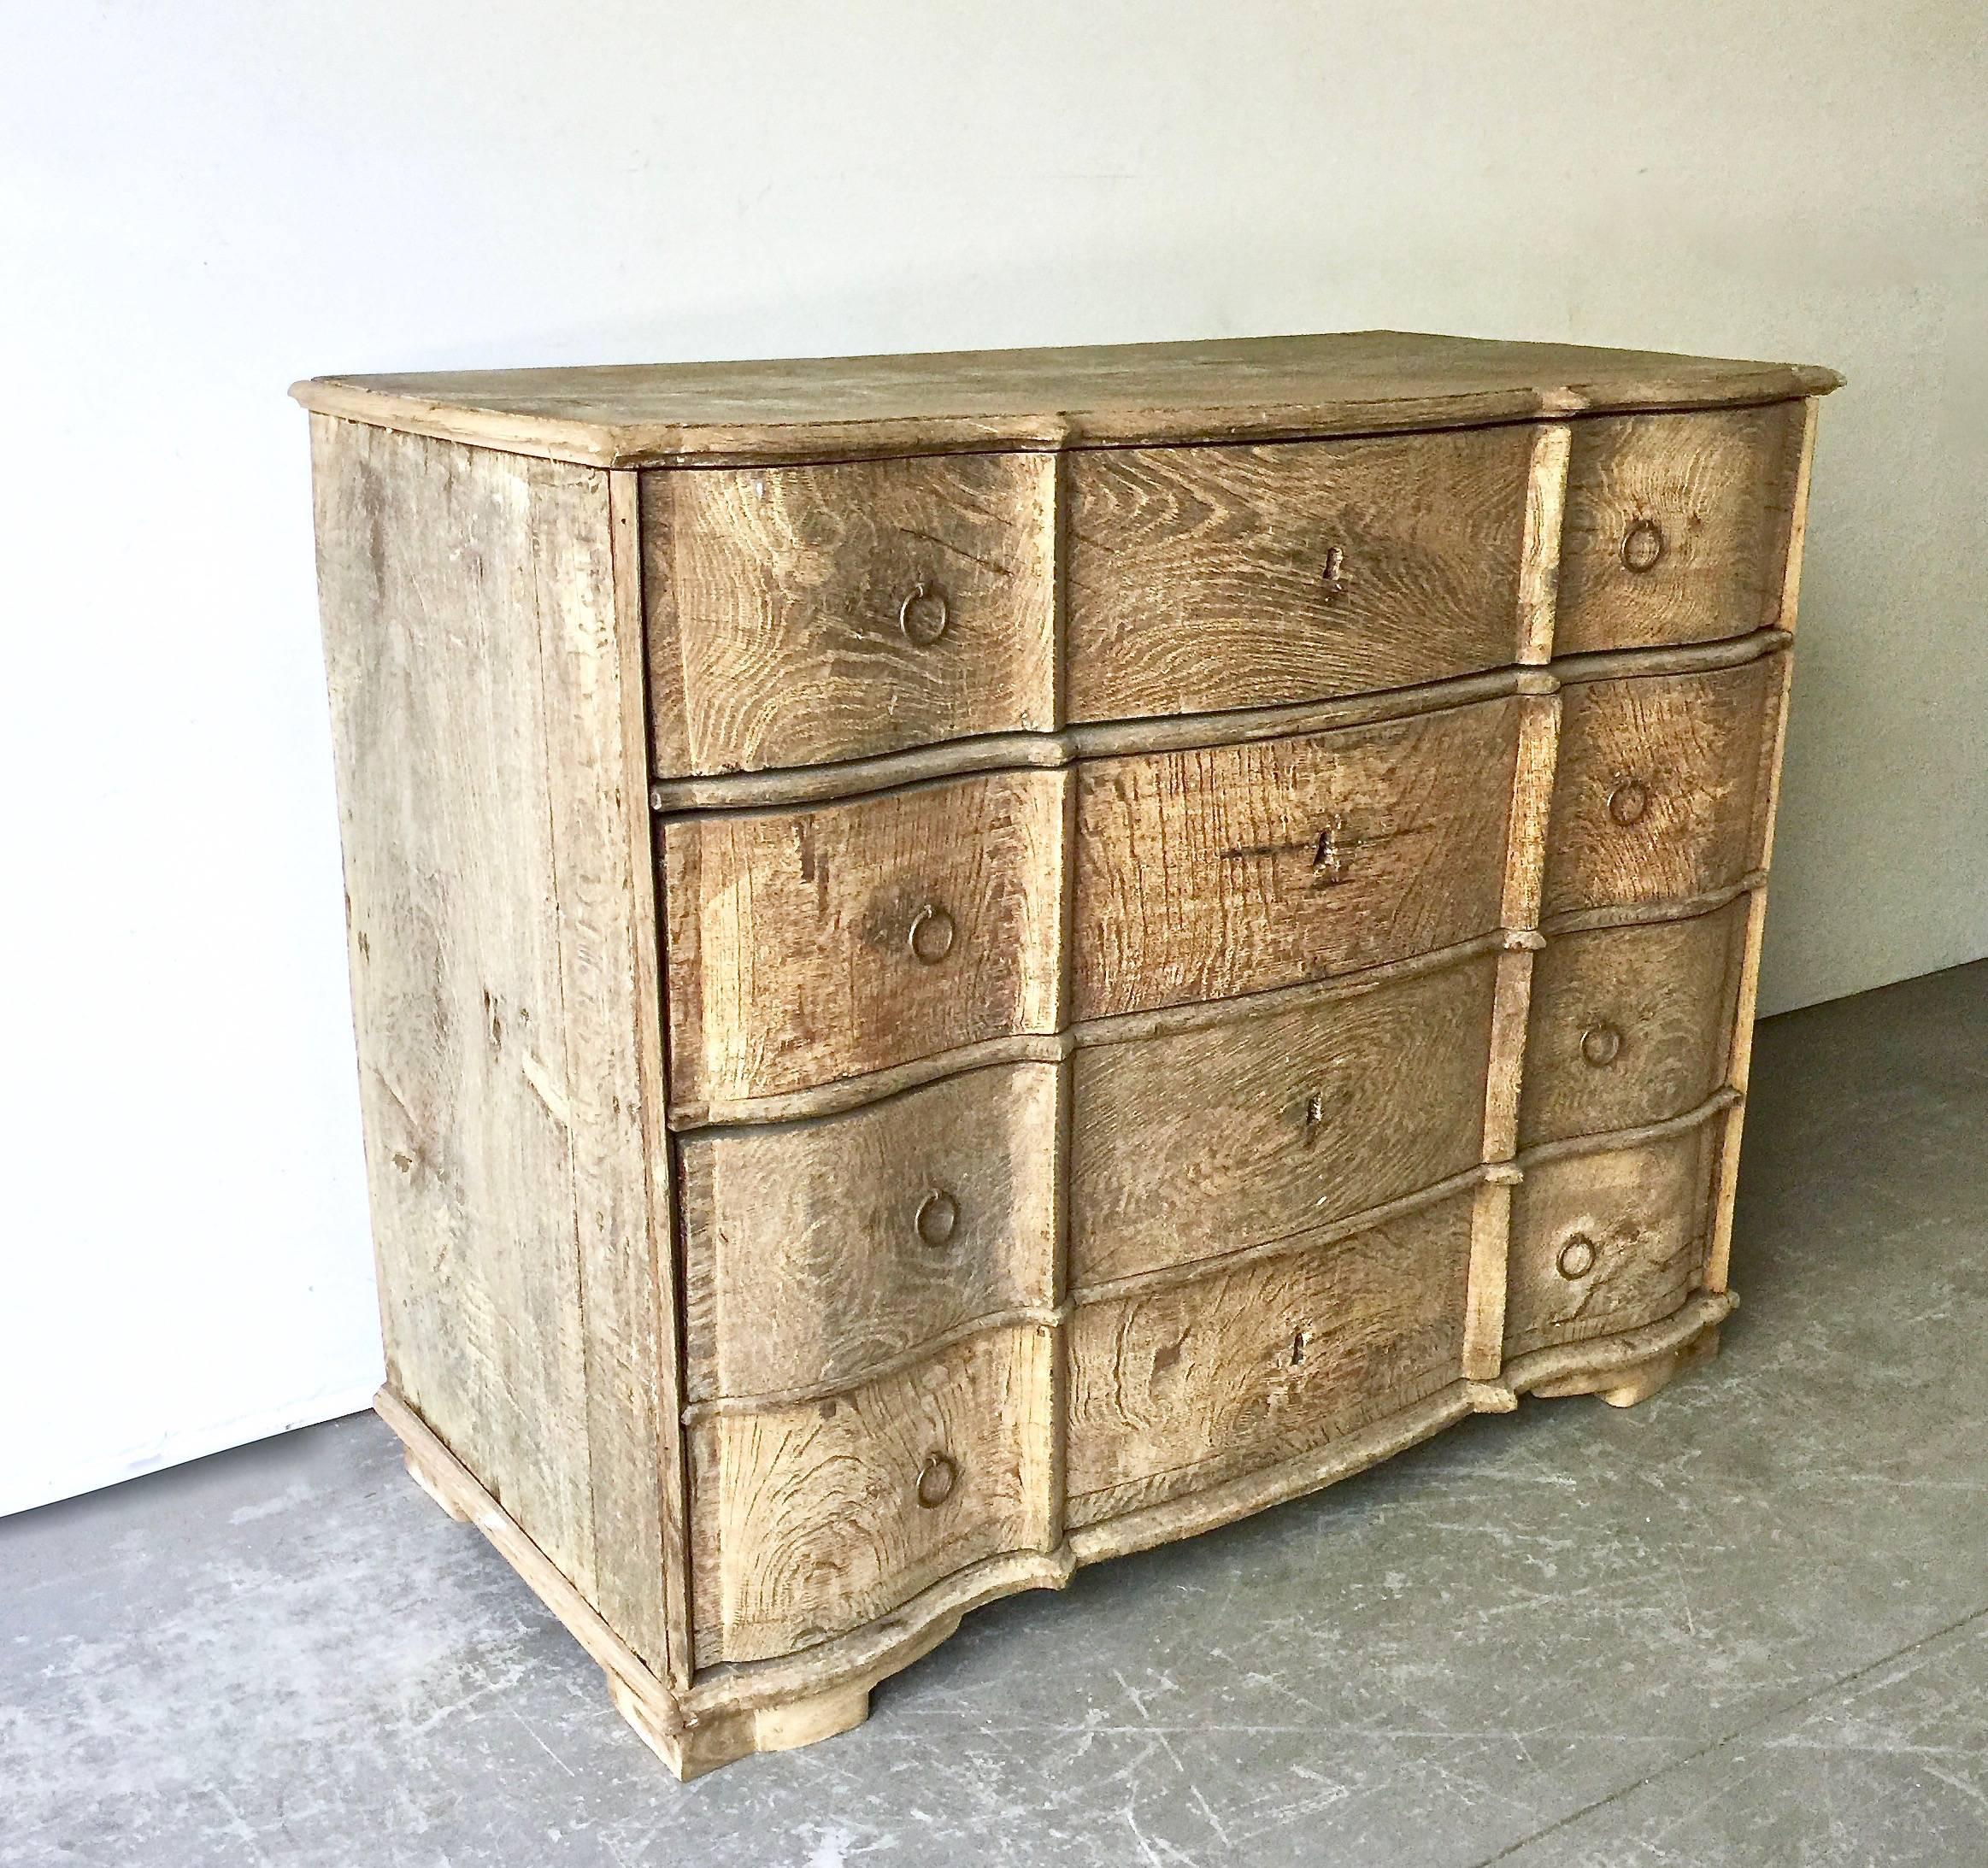 18th century Danish chest with four deep drawers from late Rococo period in richly carved bleached oak with curvaceous serpentine drawer fronts, shaped top and bracket feet. 
Here are few examples surprising pieces and objects, authentic,